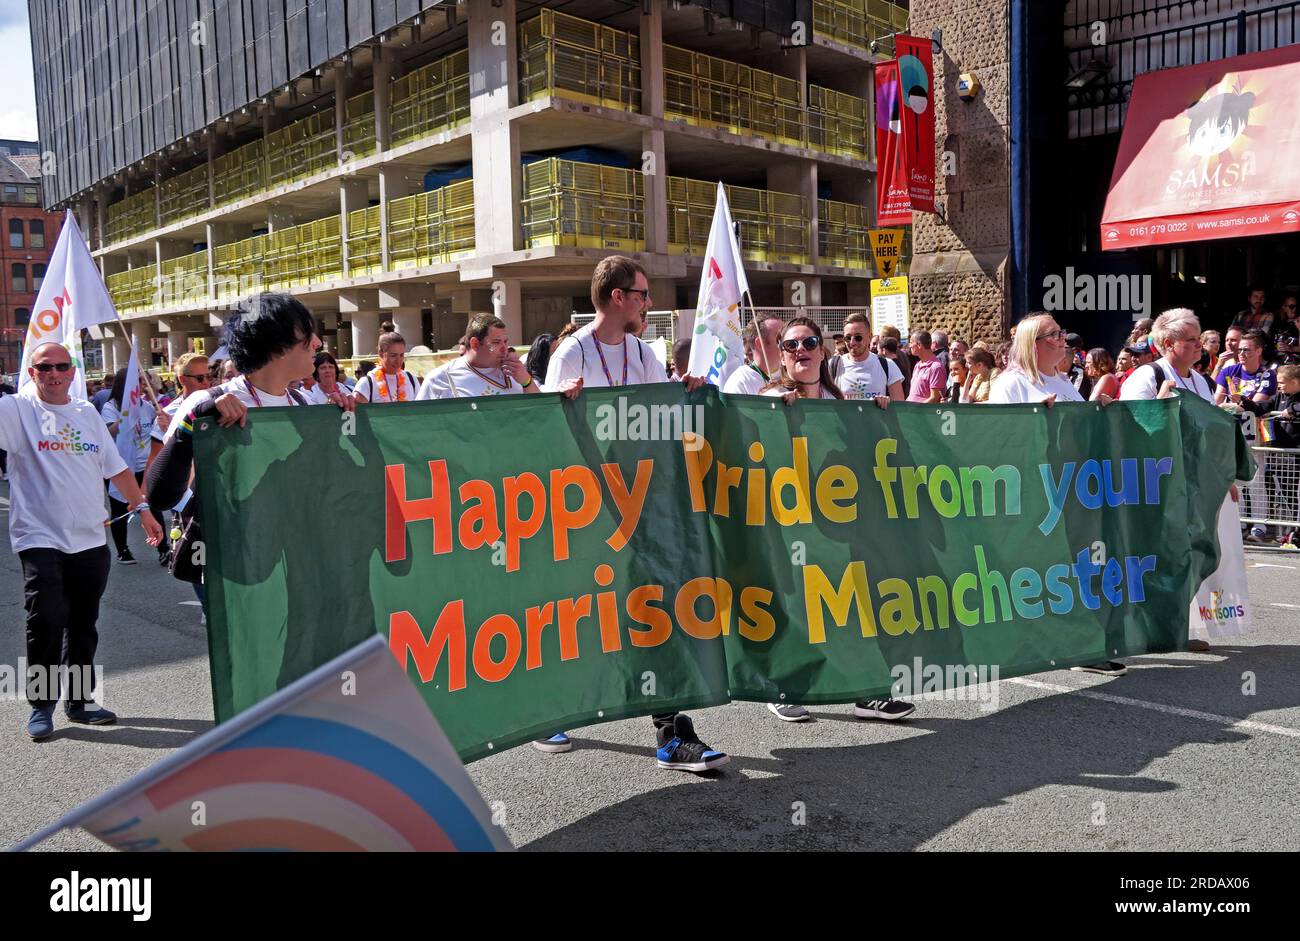 Happy Pride from Morrisons at Manchester Pride Festival Parade, 36 Whitworth Street, Manchester, England, UK, M1 3NR Stockfoto